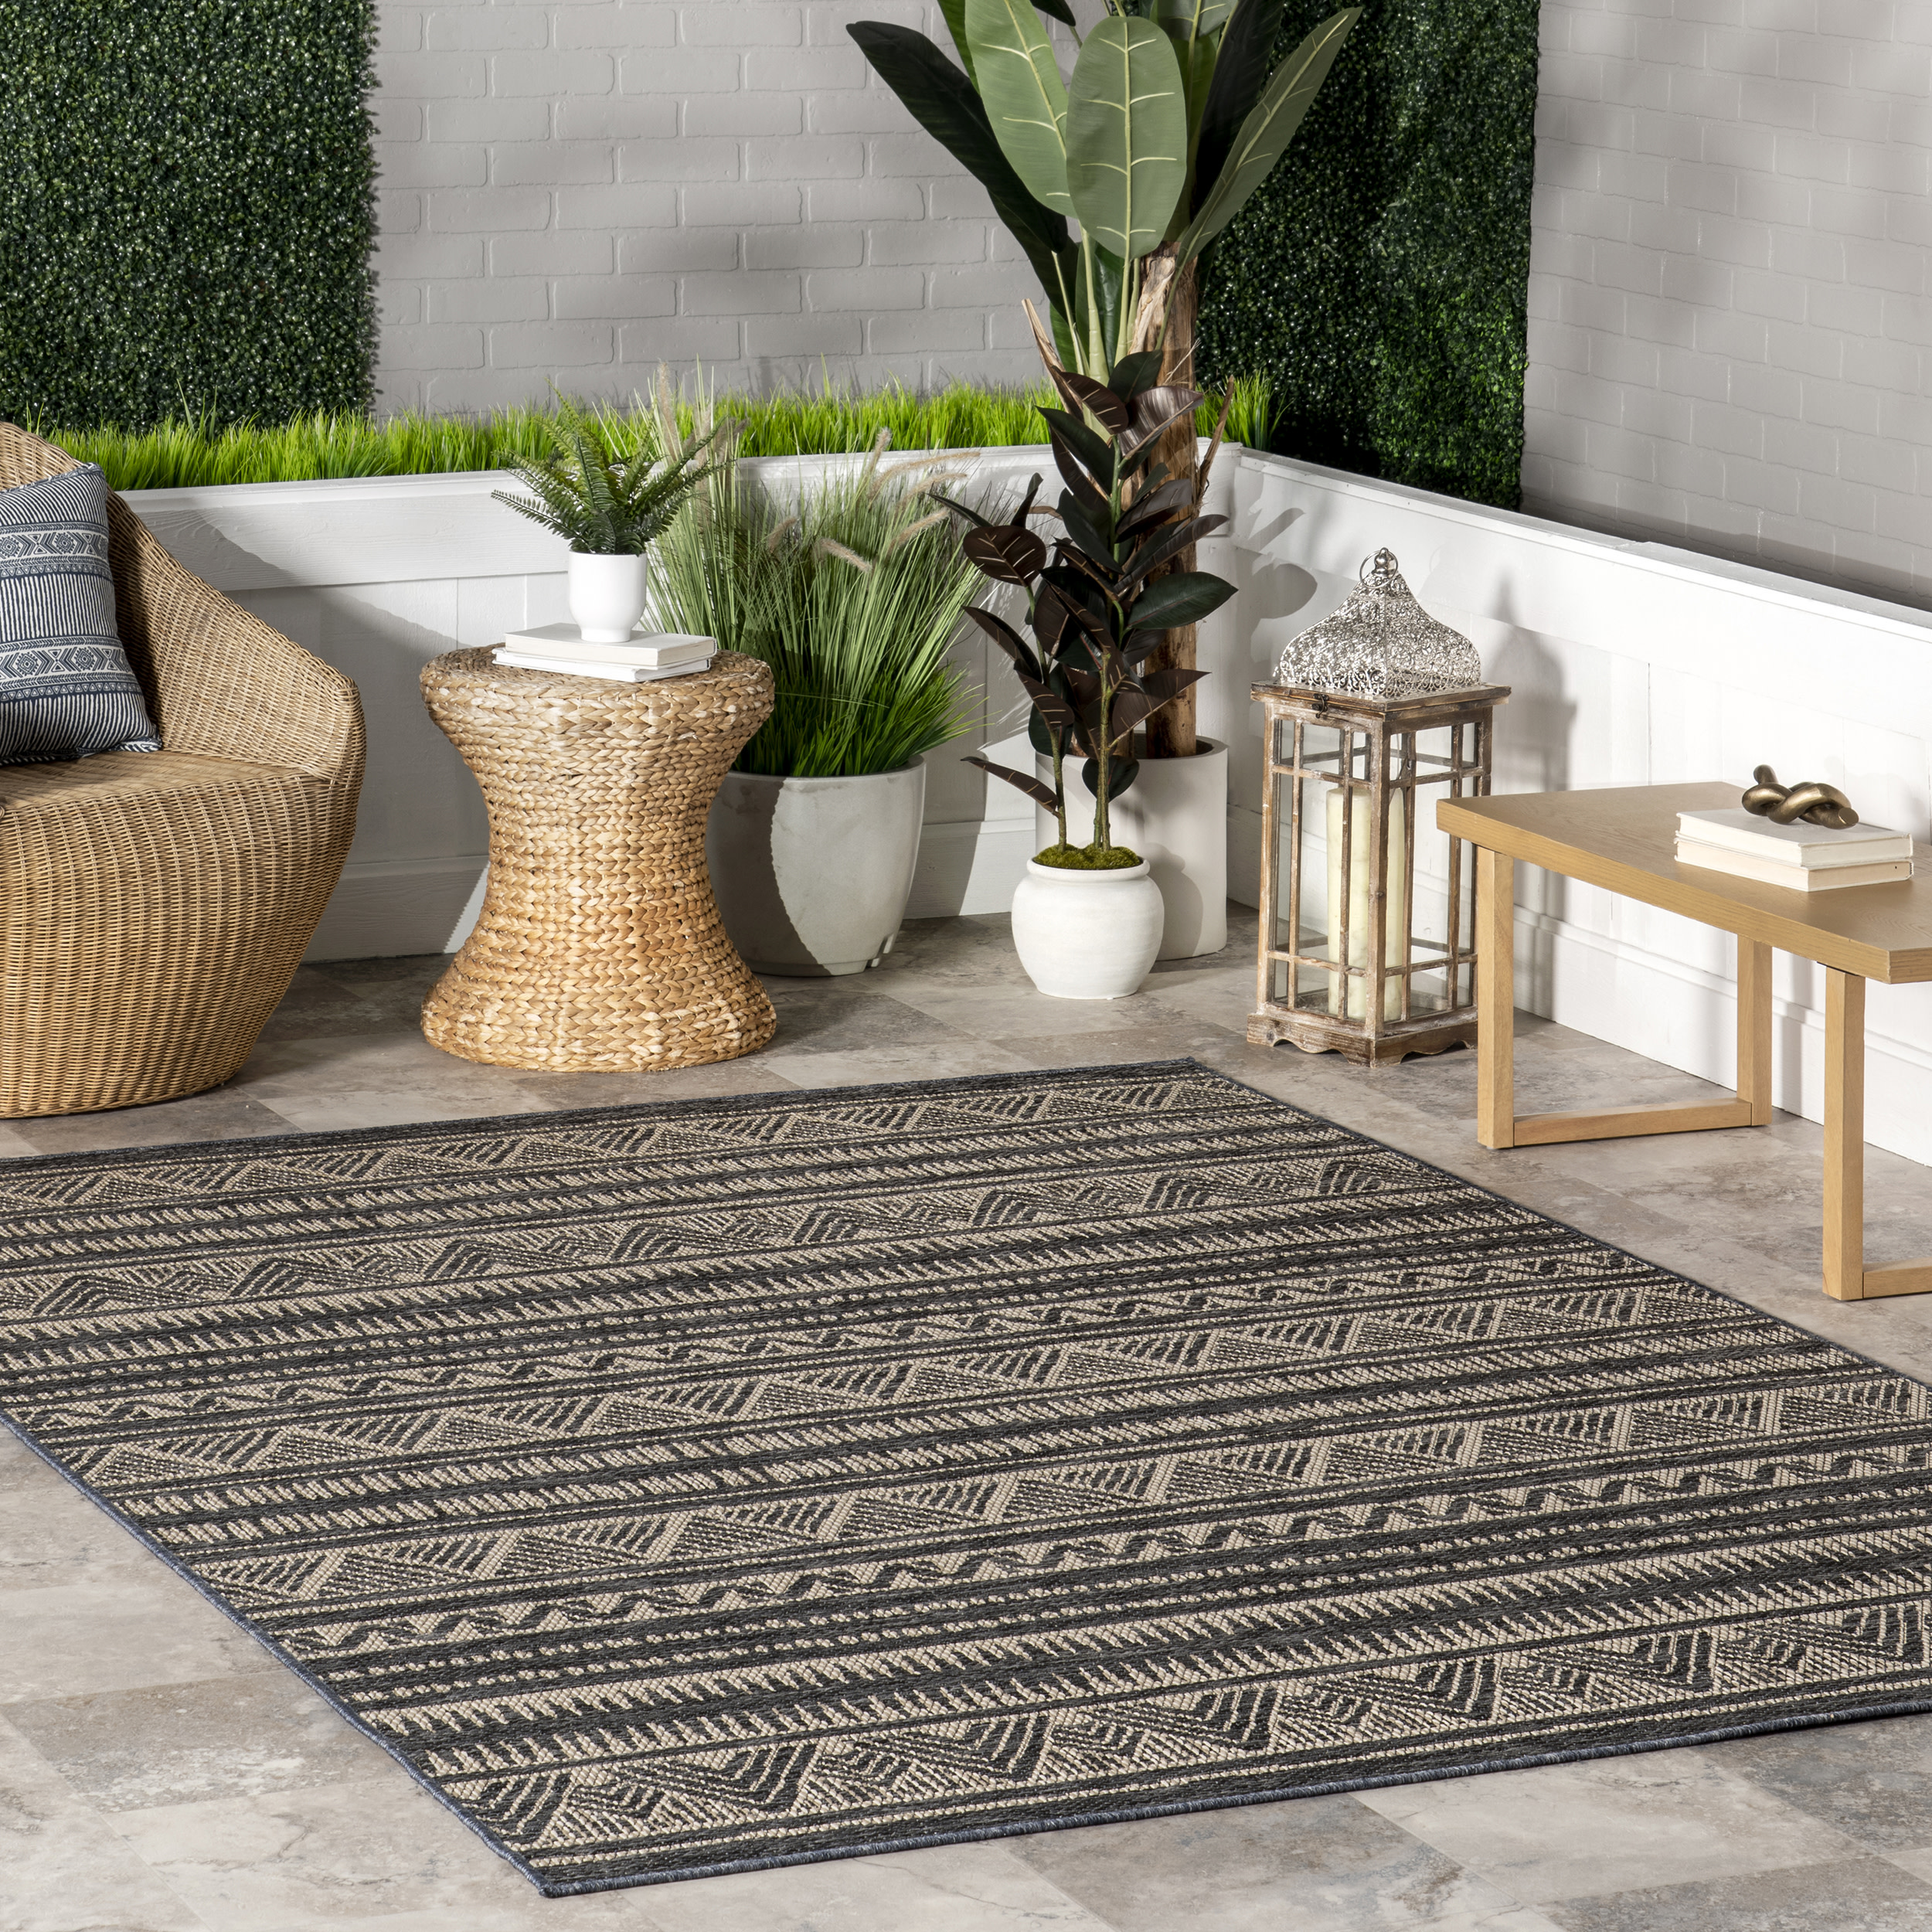 nuLOOM Maia Striped Tribal Indoor/Outdoor Area Rug, 8' x 10', Charcoal - image 1 of 9